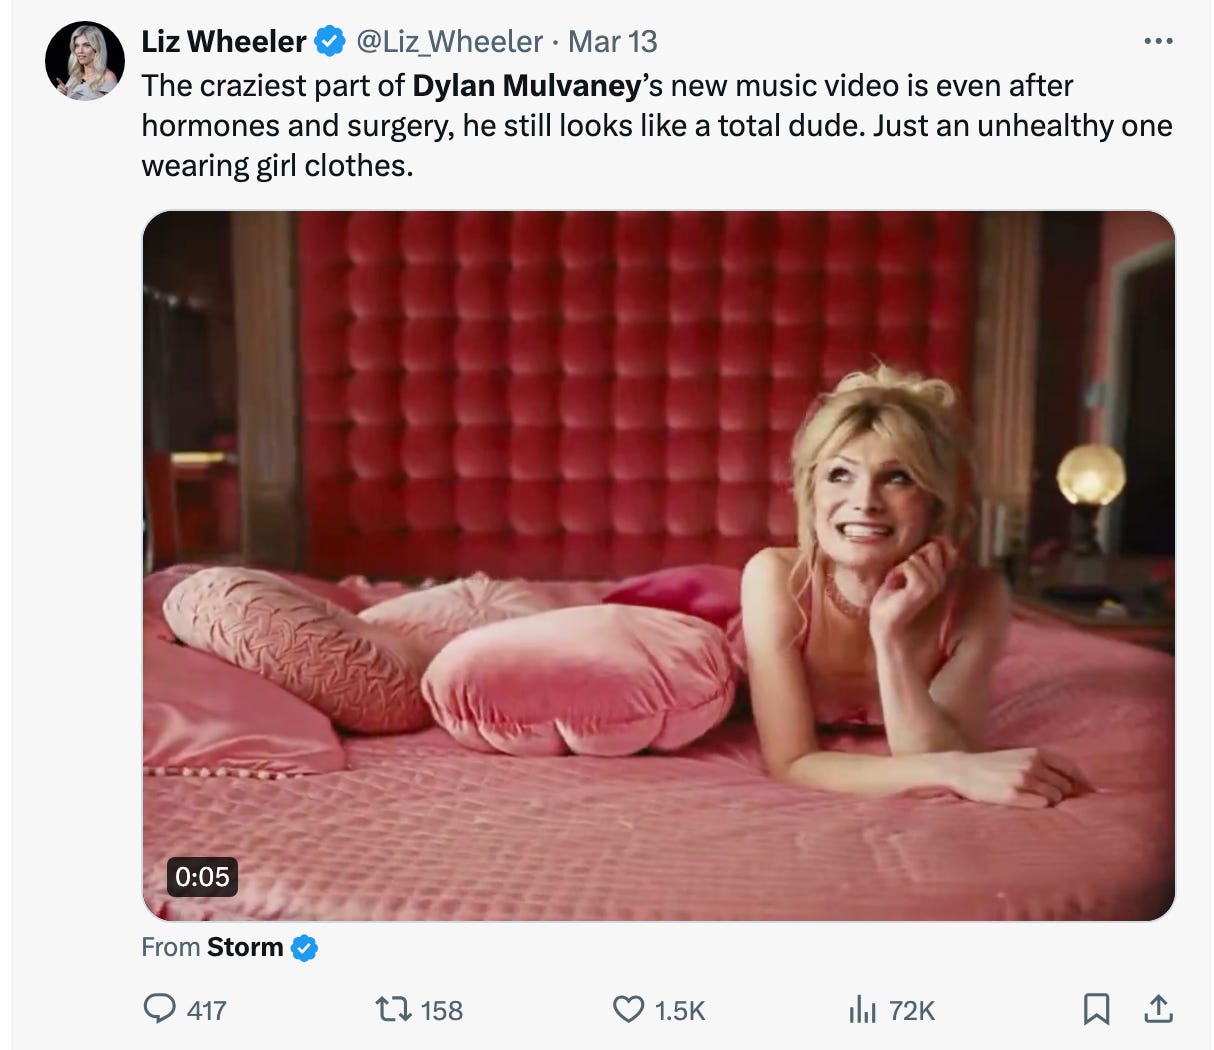 Dylan Mulvaney is smiling on a pink bed, under a hateful caption attacking her appearance.